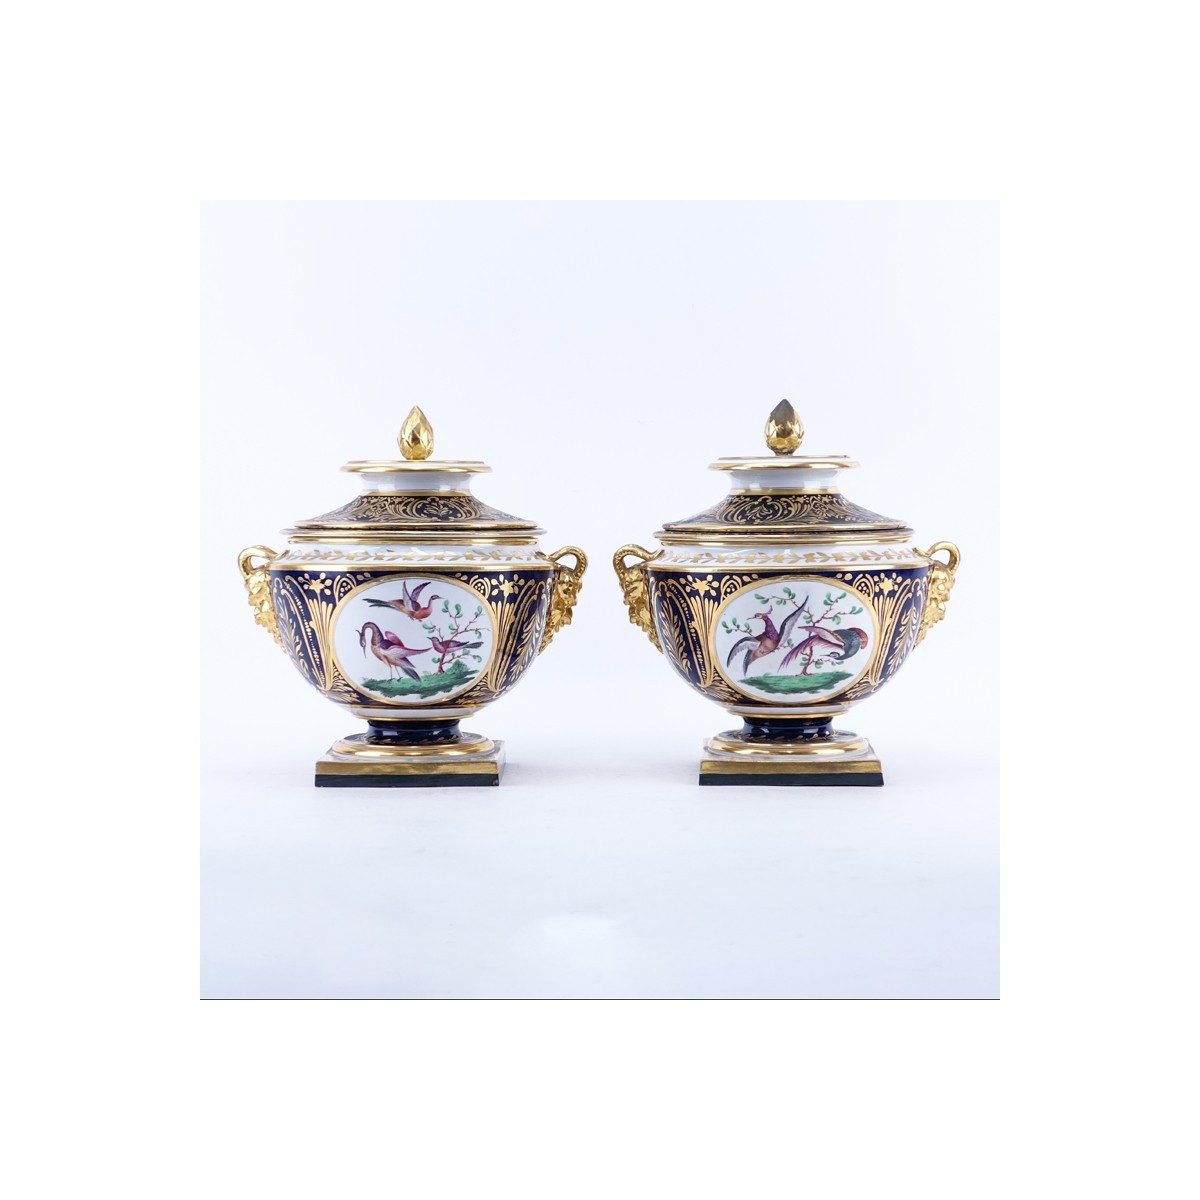 Pair of Barr, Flight & Barr Worcester Porcelain Imari Style Covered Tureen with Satyr Handles. Signed beneath the cover, impressed mark to base.